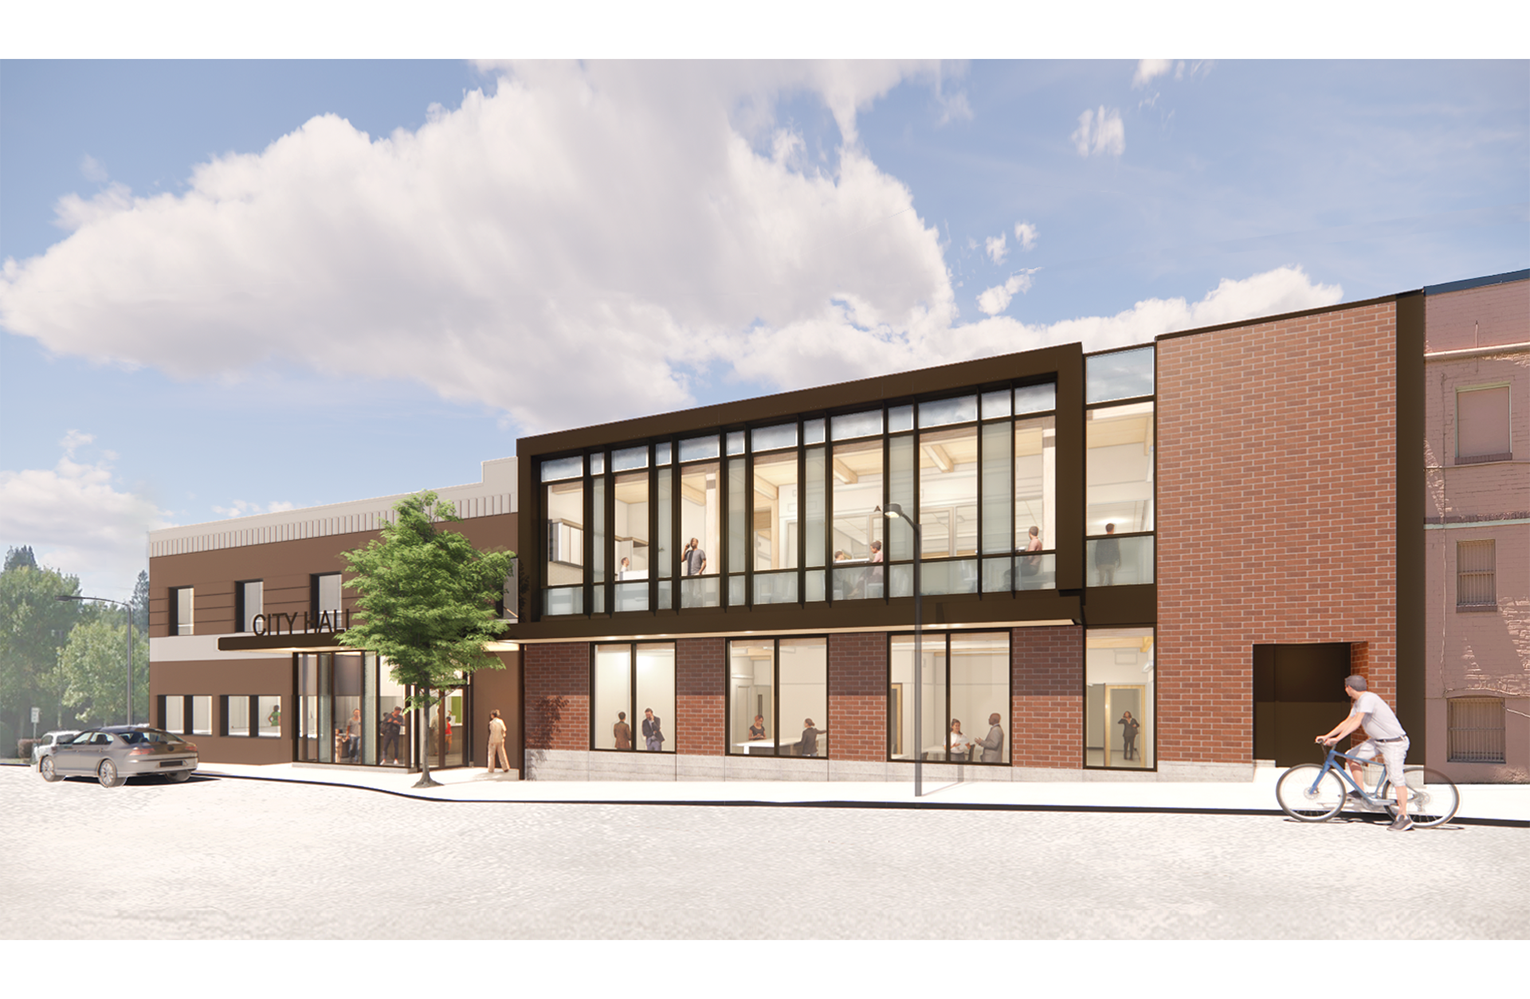 Exterior rendering of renovated and expanded Forest Grove City Hall featuring floor to ceiling windows on the second floor addition. Both the additon, as well as the original building, which can be seen in the background are clad in brick. A bicyclist is riding by on the right.